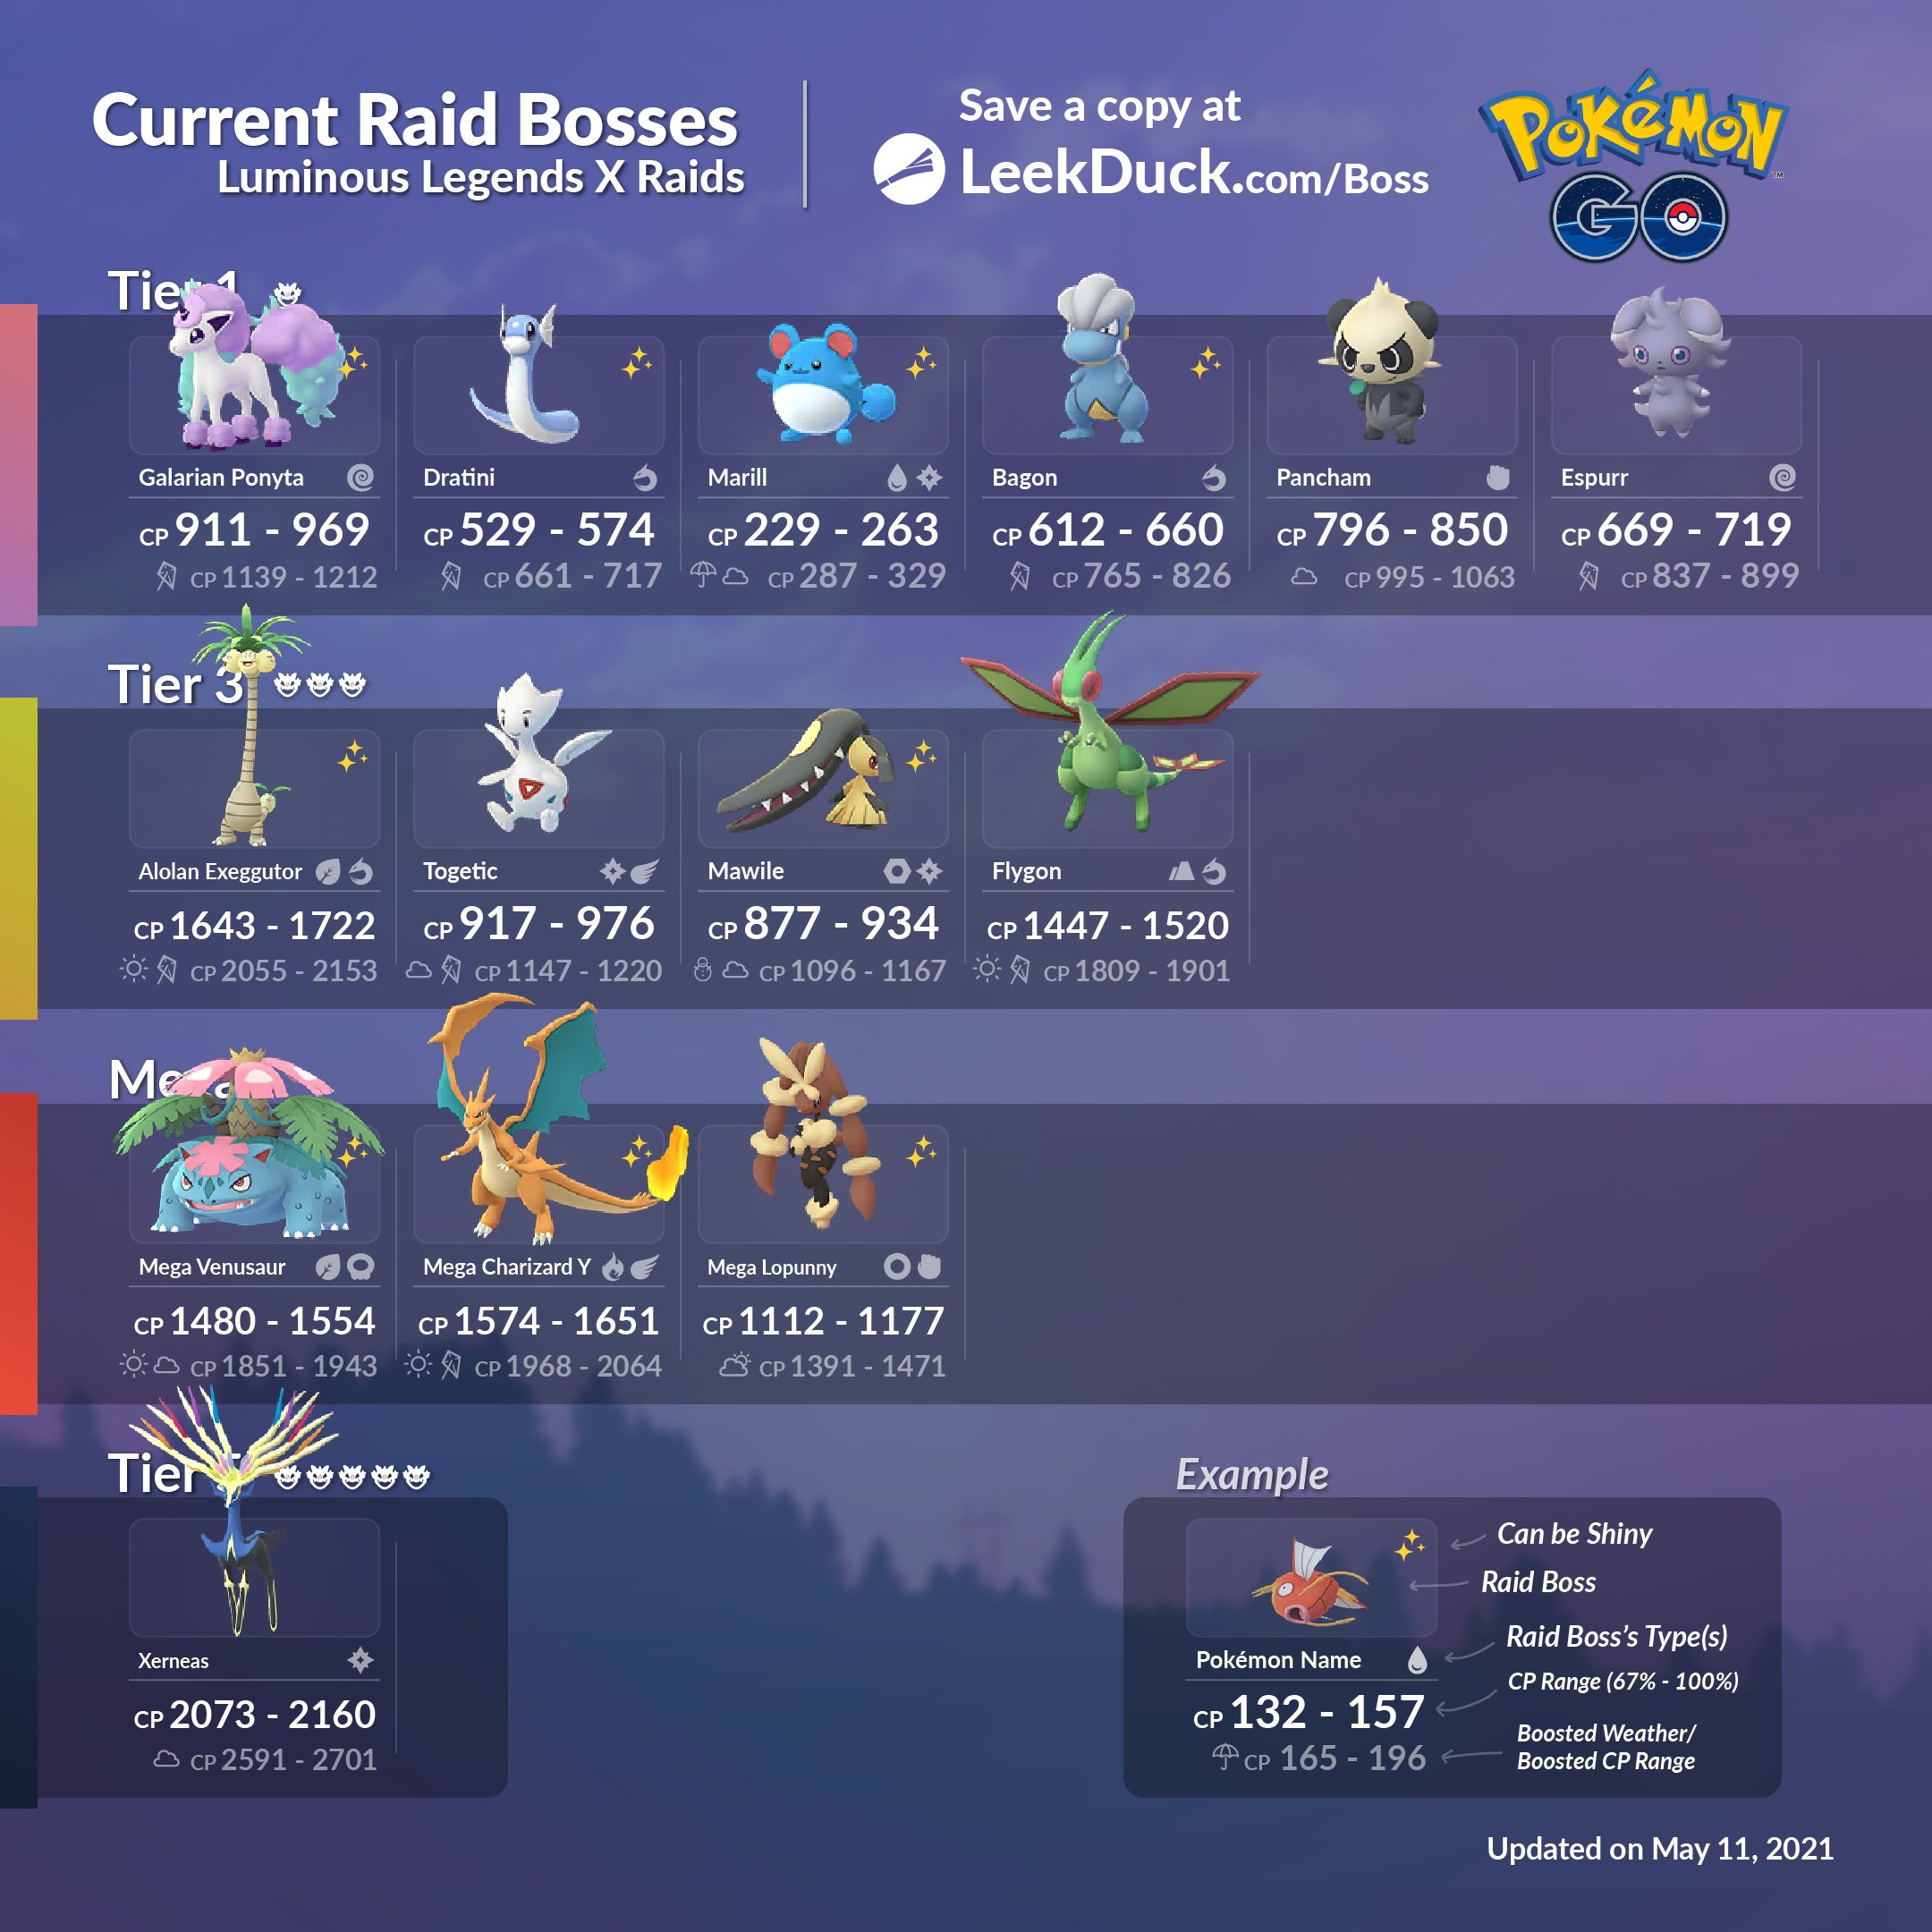 Leek Duck on Twitter: "Upcoming/Current Raid Bosses - Luminous Legends X event - Rewards Unlocked • Pancham and Shiny Galarian Ponyta will be available in local area after May 11, at